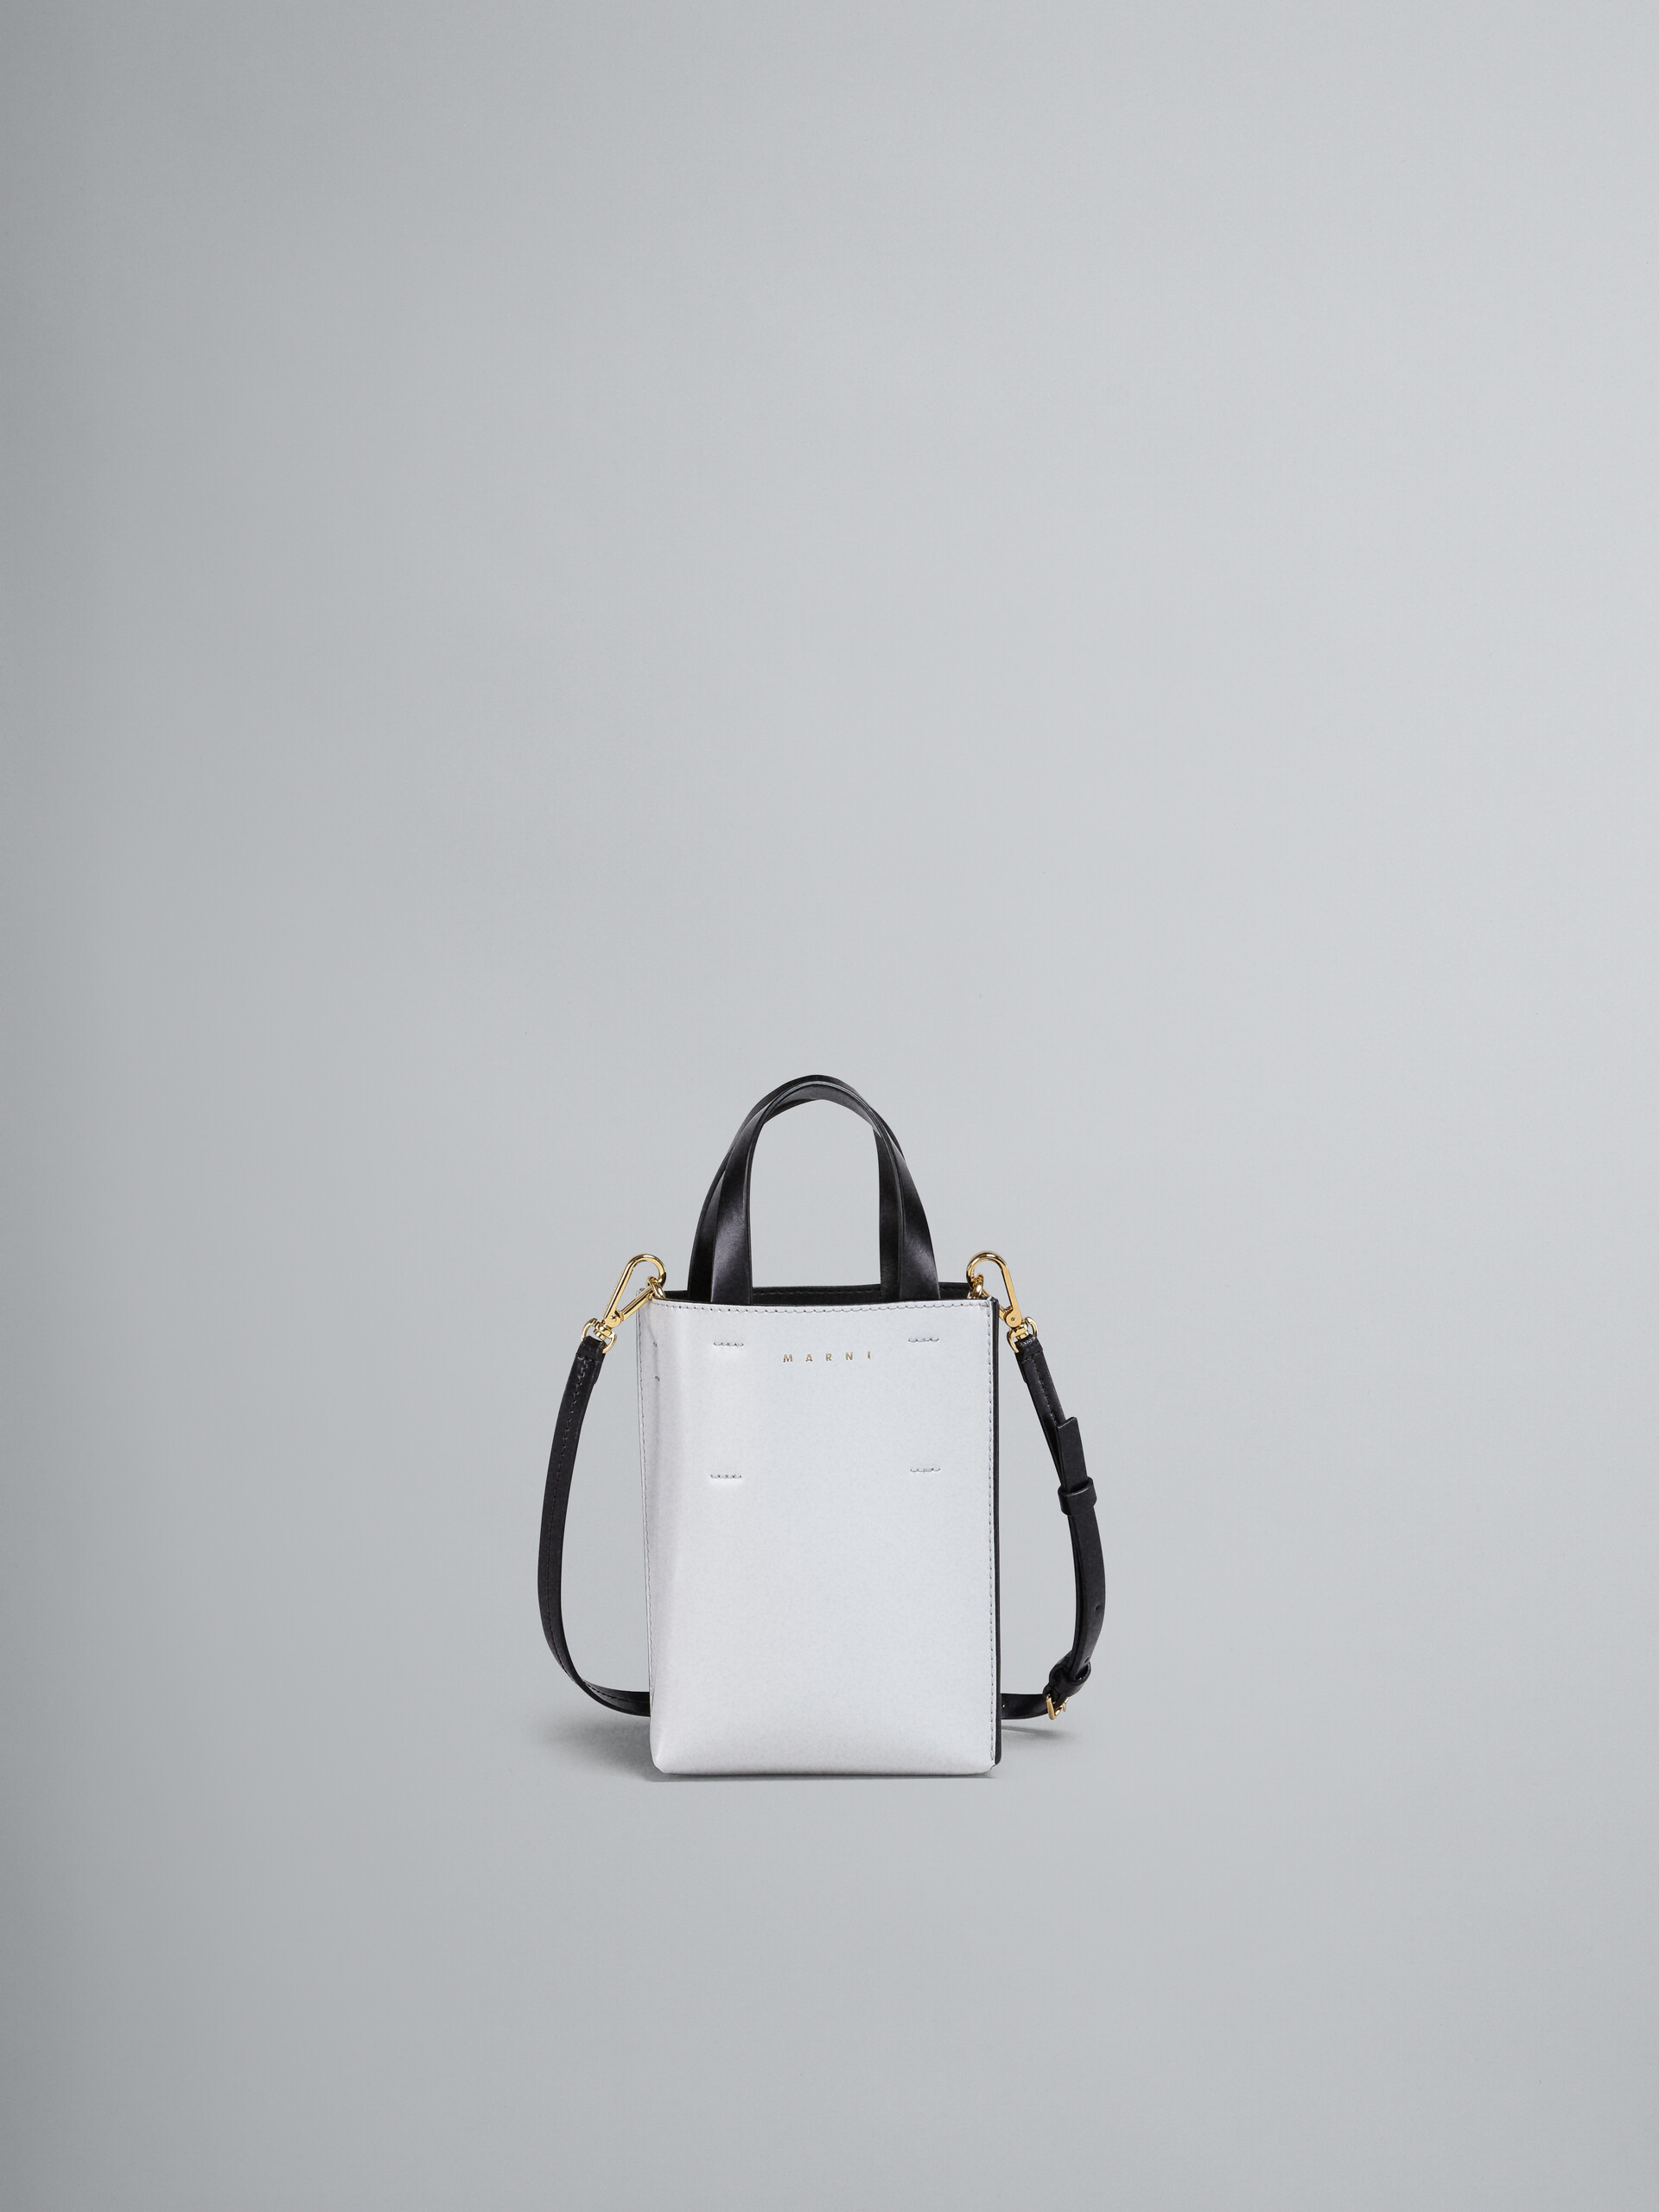 White and black polished leather nano MUSEO tote bag - Shopping Bags - Image 1